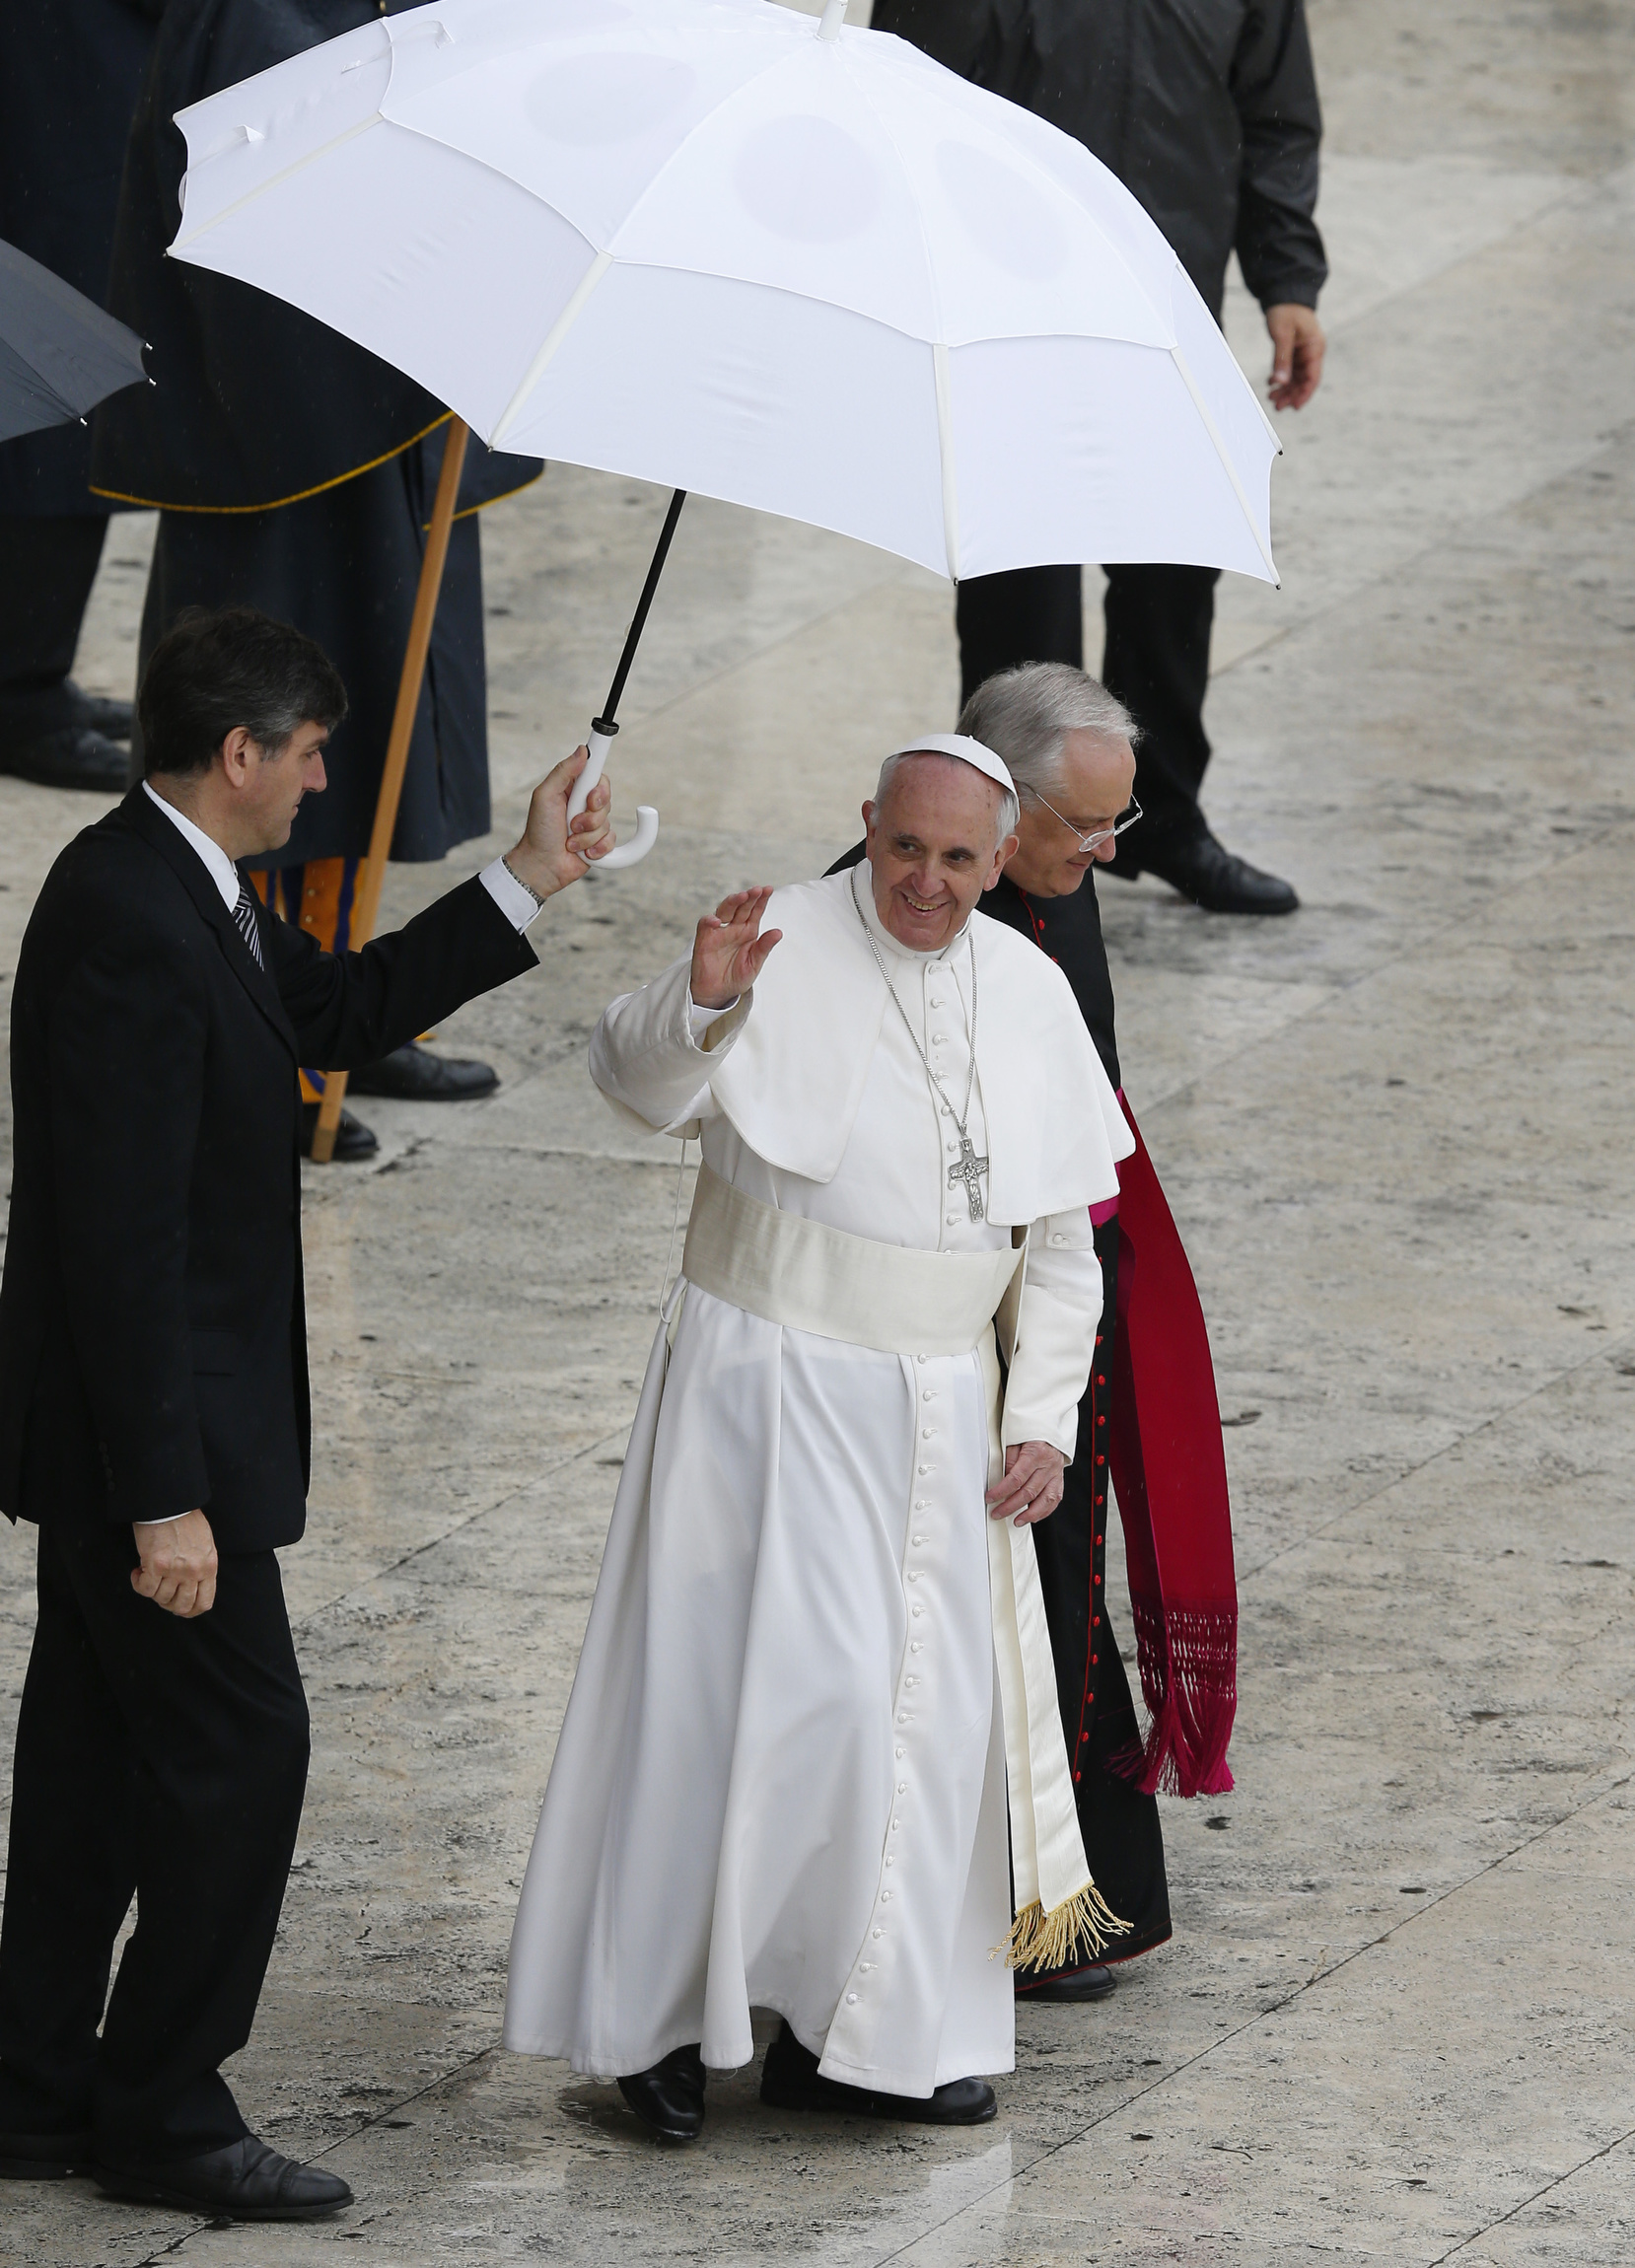 Pope Francis waves from the popemobile at end of canonization Mass at Vatican